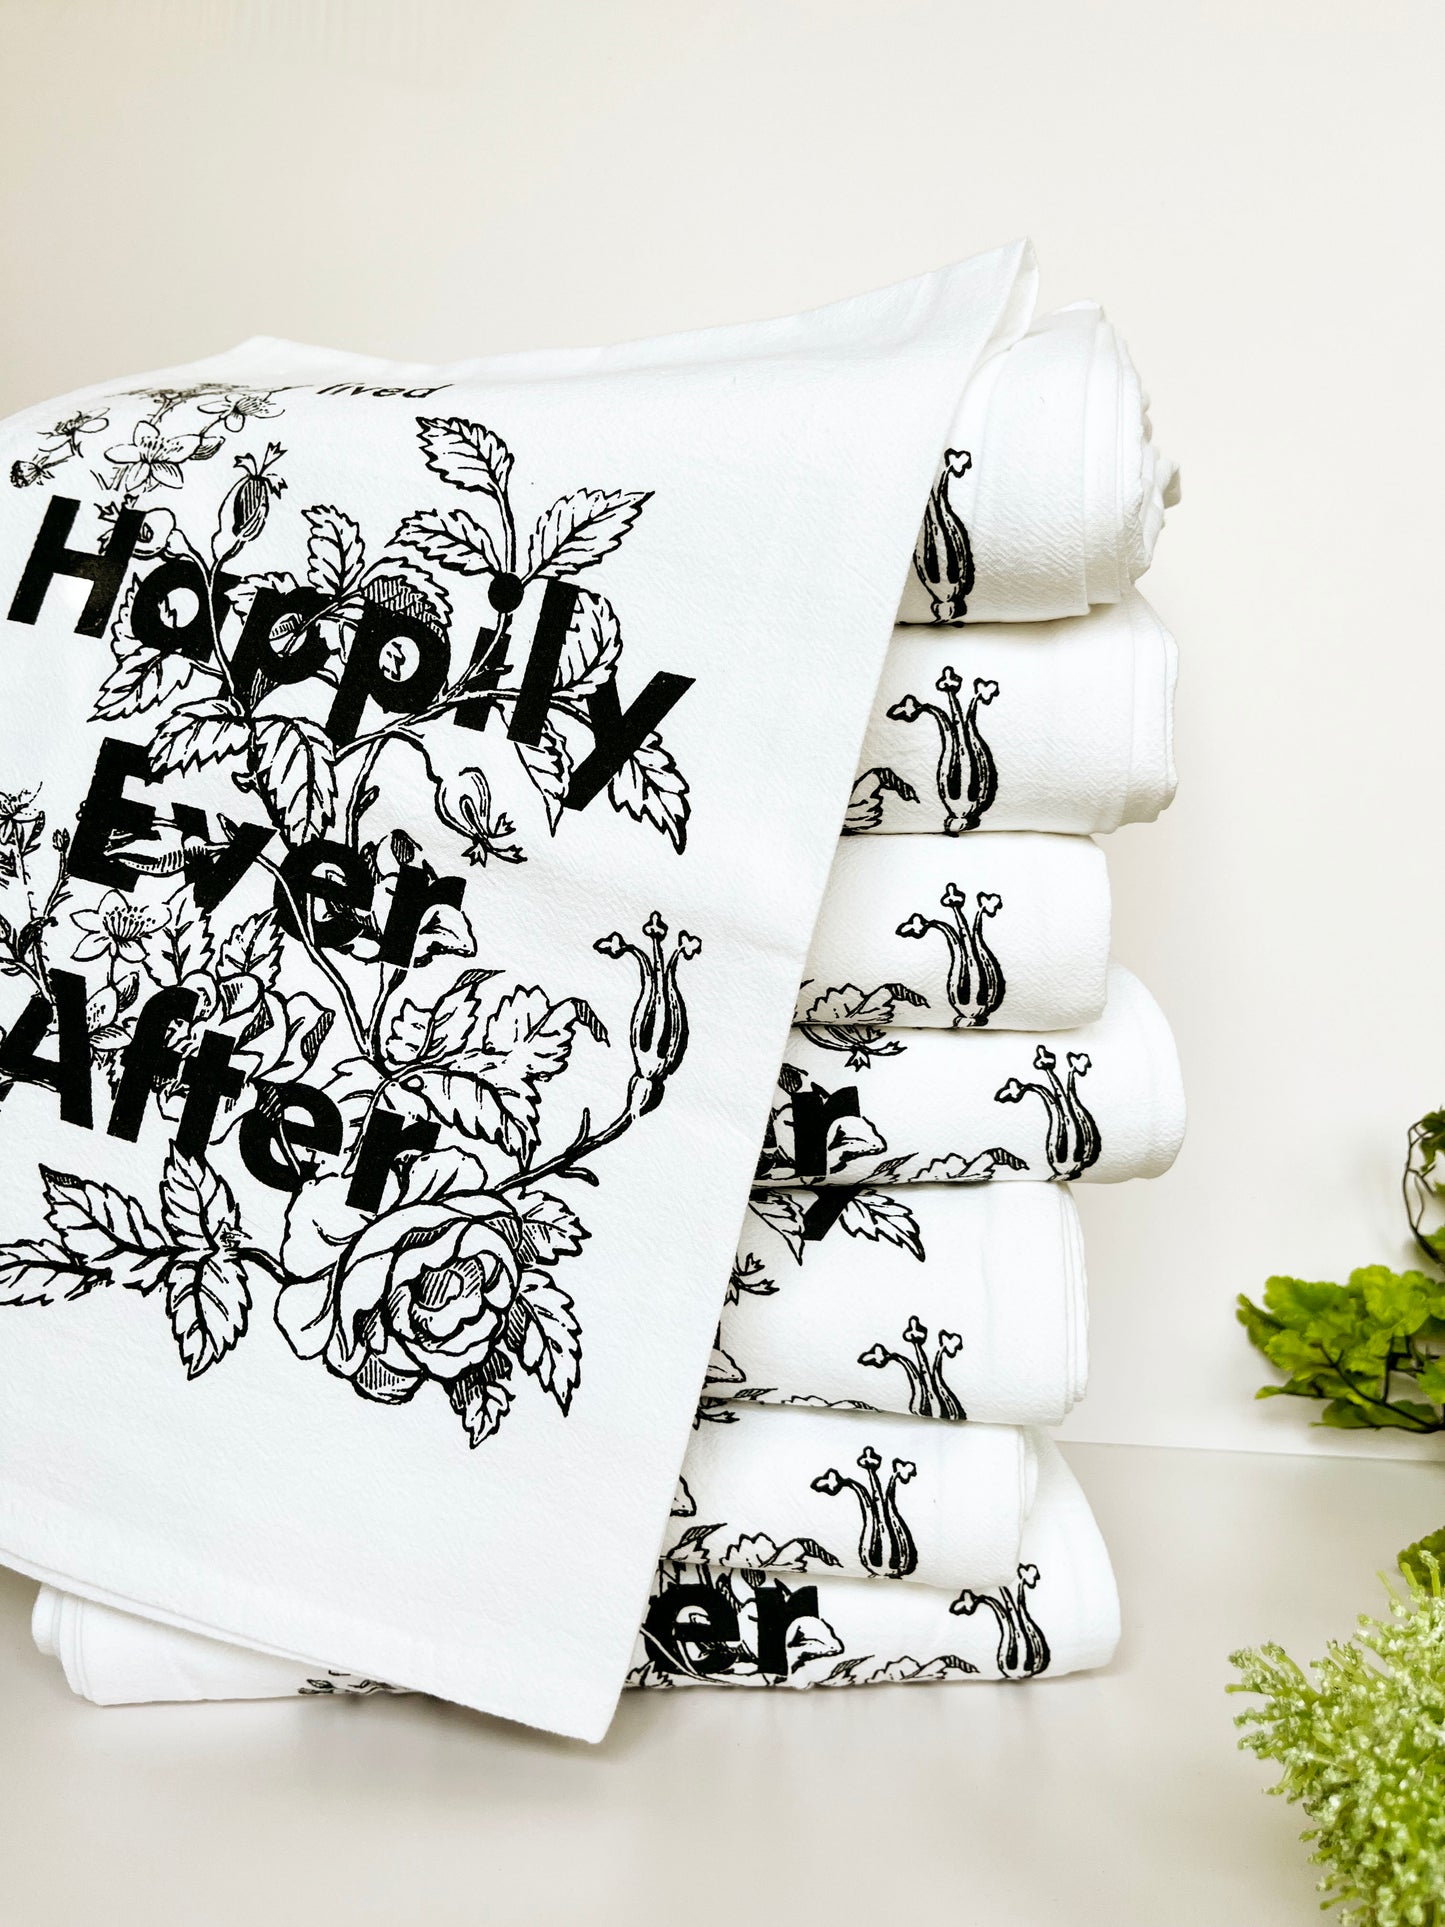 high quality dish towel wedding engagement housewarming and they lived happily ever after screen print retro flowers tea kitchen cotton towel cute modern retro floral home decor coin laundry cottagecore farmhouse 